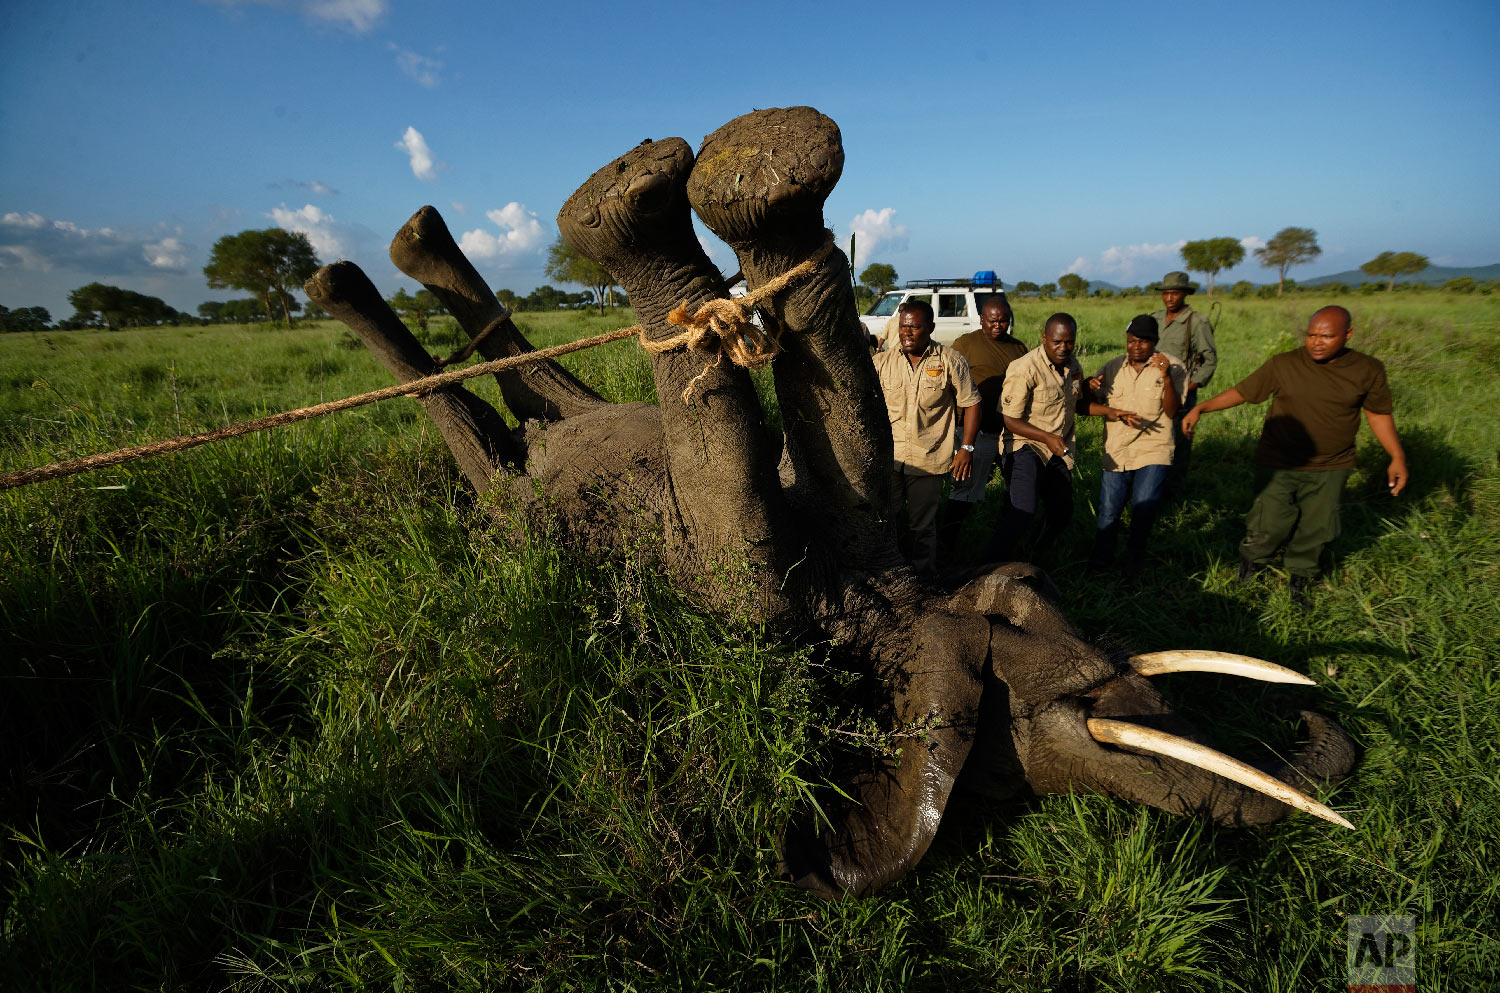  A team of wildlife veterinarians use a 4x4 vehicle and a rope to turn over a tranquilized elephant in order to attach a GPS tracking collar and remove the tranquilizer dart, in Mikumi National Park, Tanzania on March 21, 2018. (AP Photo/Ben Curtis) 